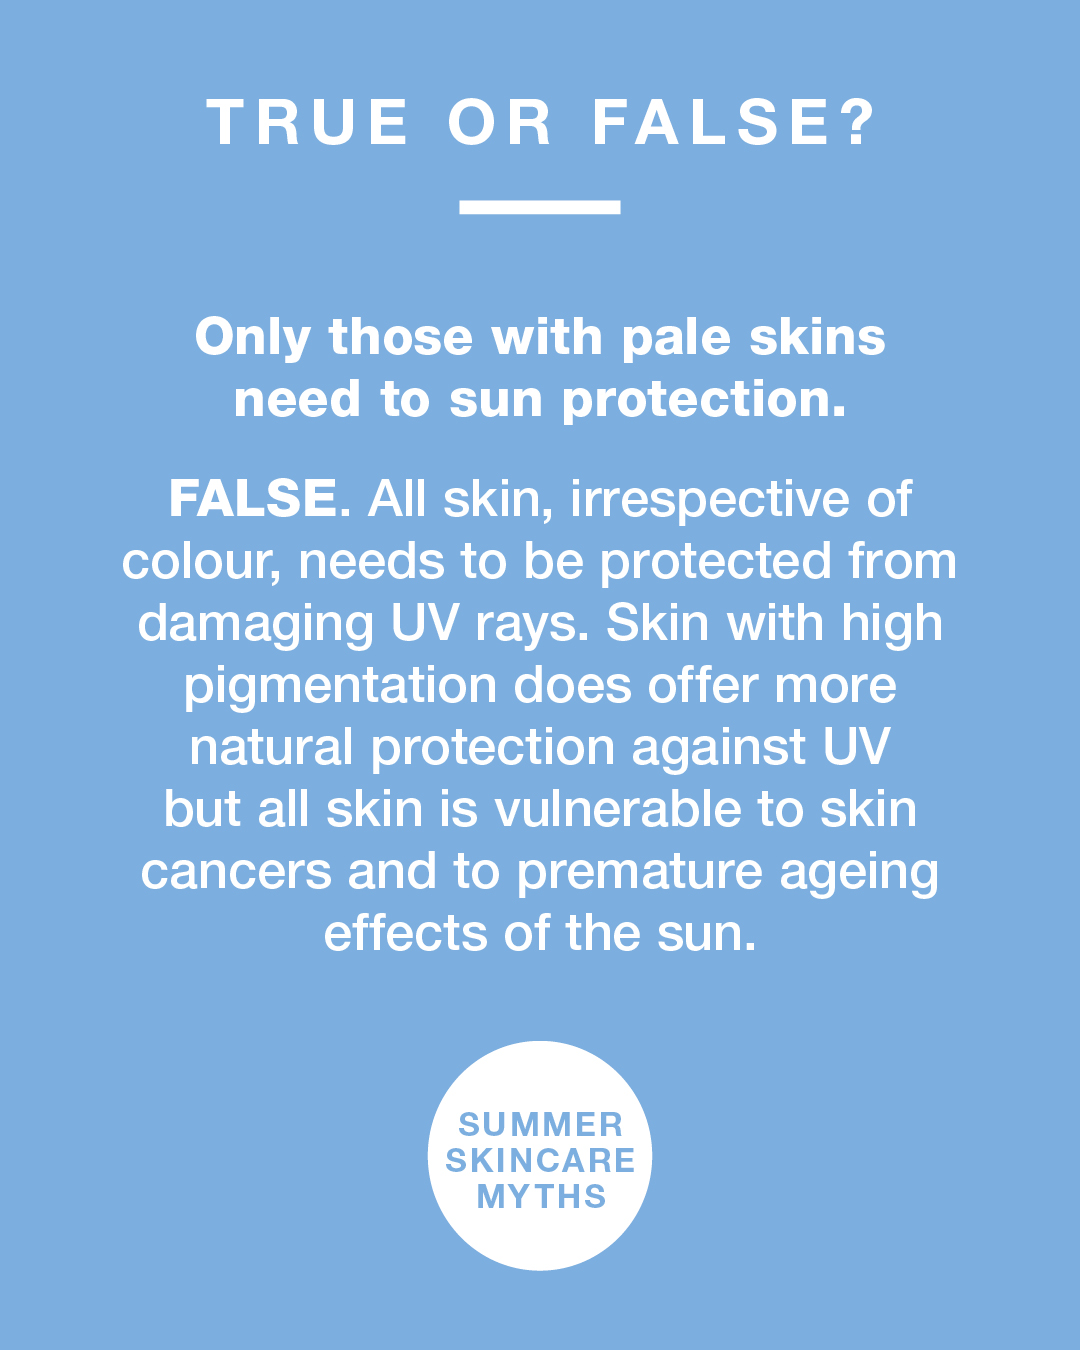 Summer skincare facts true or false - only those with pale skin need sun protection? False.